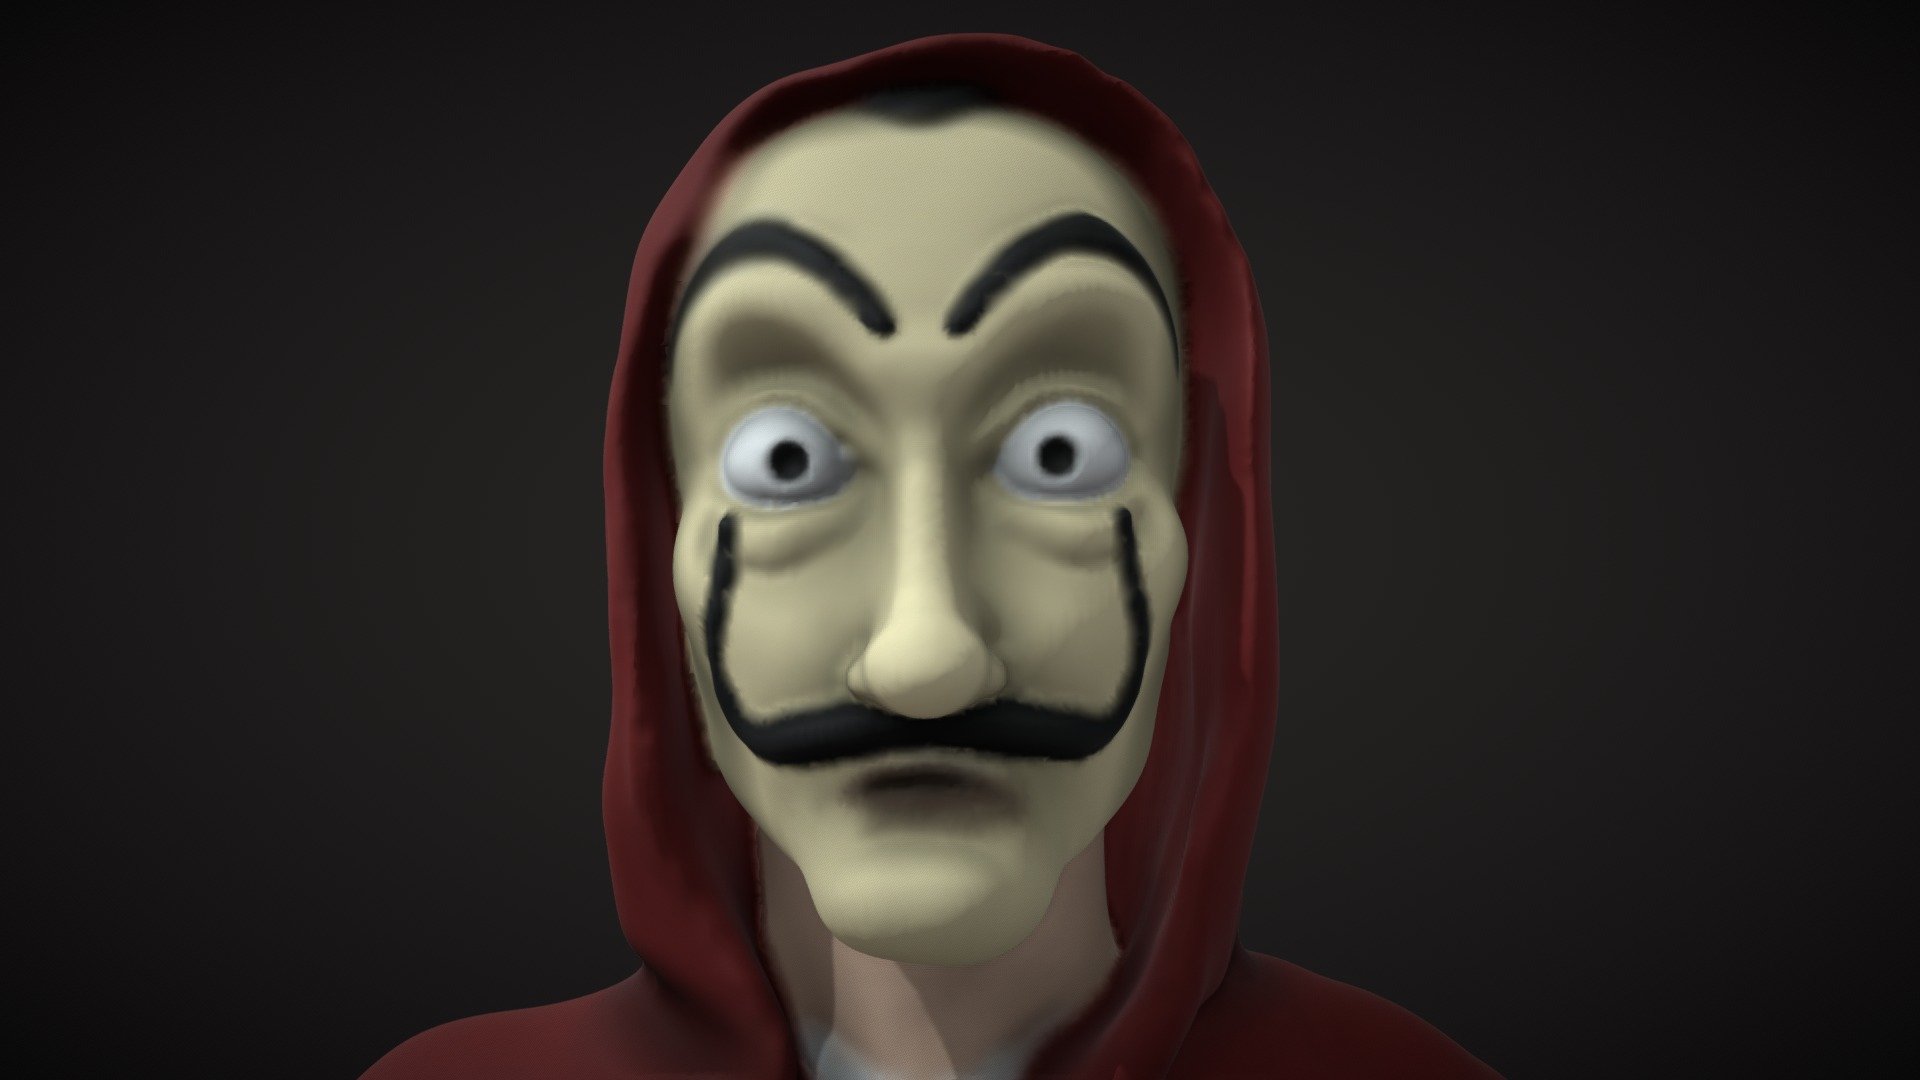 Sculpt made in MasterpieceVR, based on Netflix Money Heist character, not for commercial use 3d model